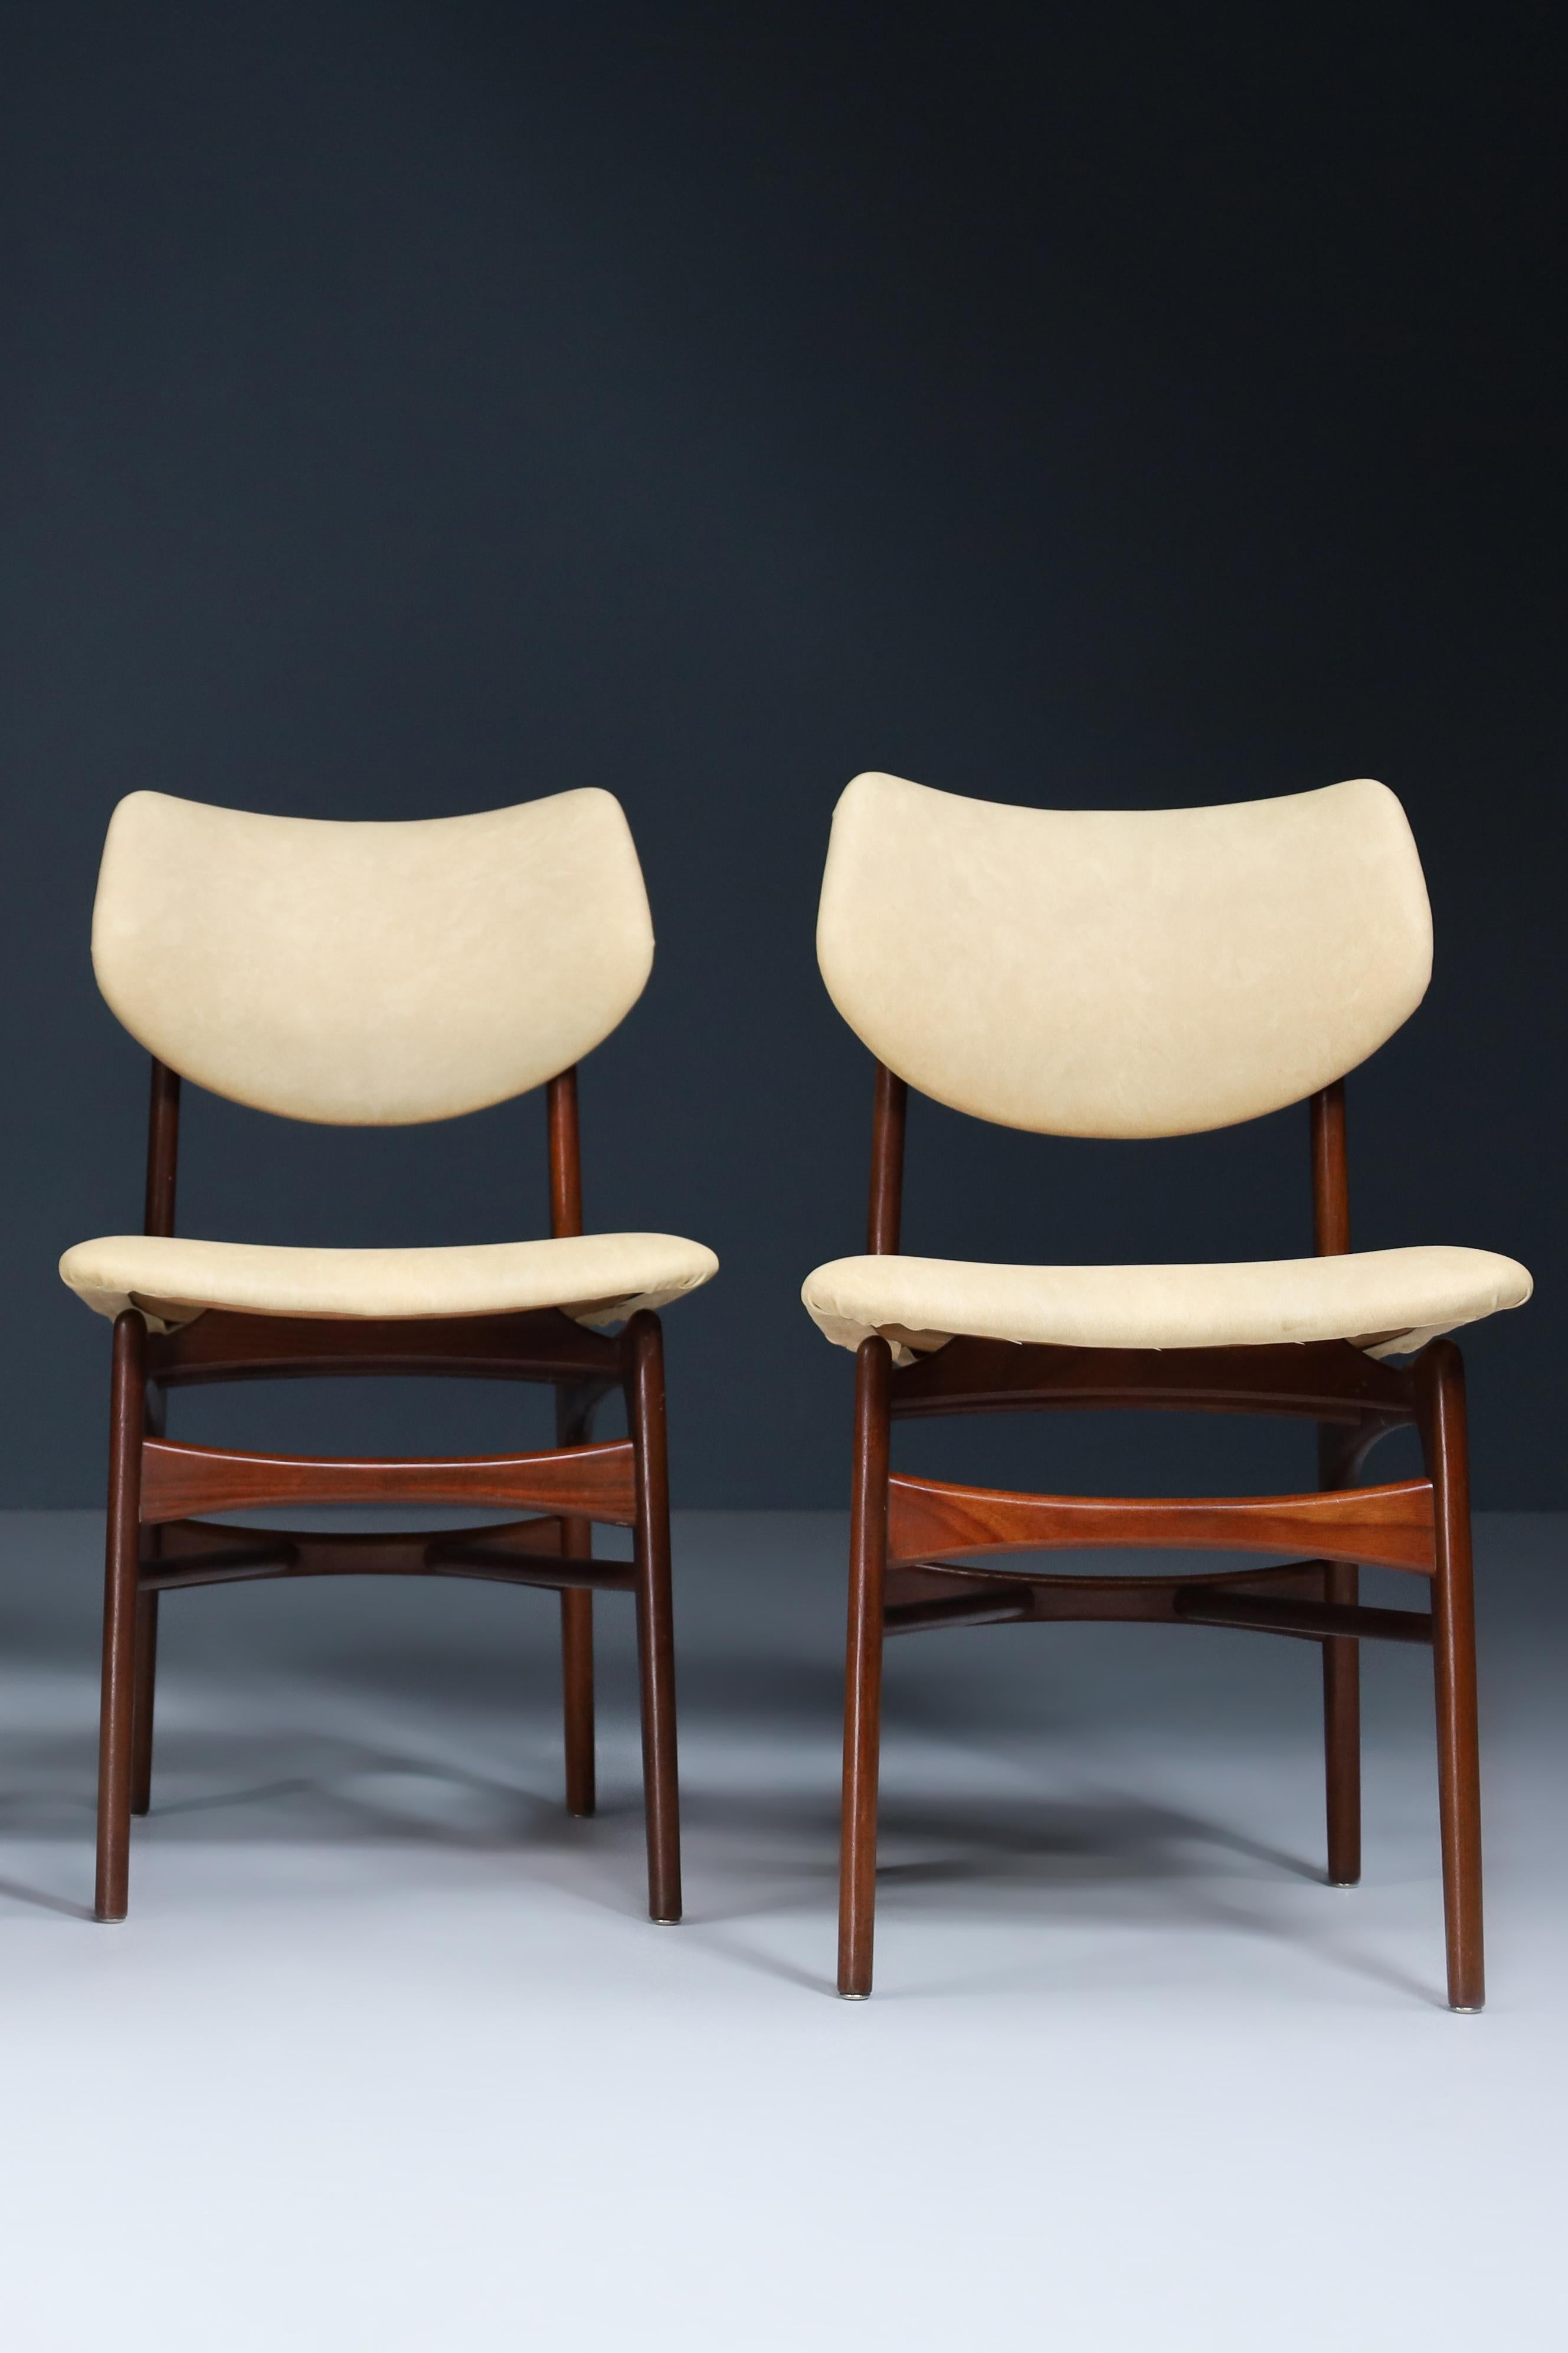 20th Century Louis Van Teeffelen for Wébé Dining Chairs, the Netherlands 1960s For Sale